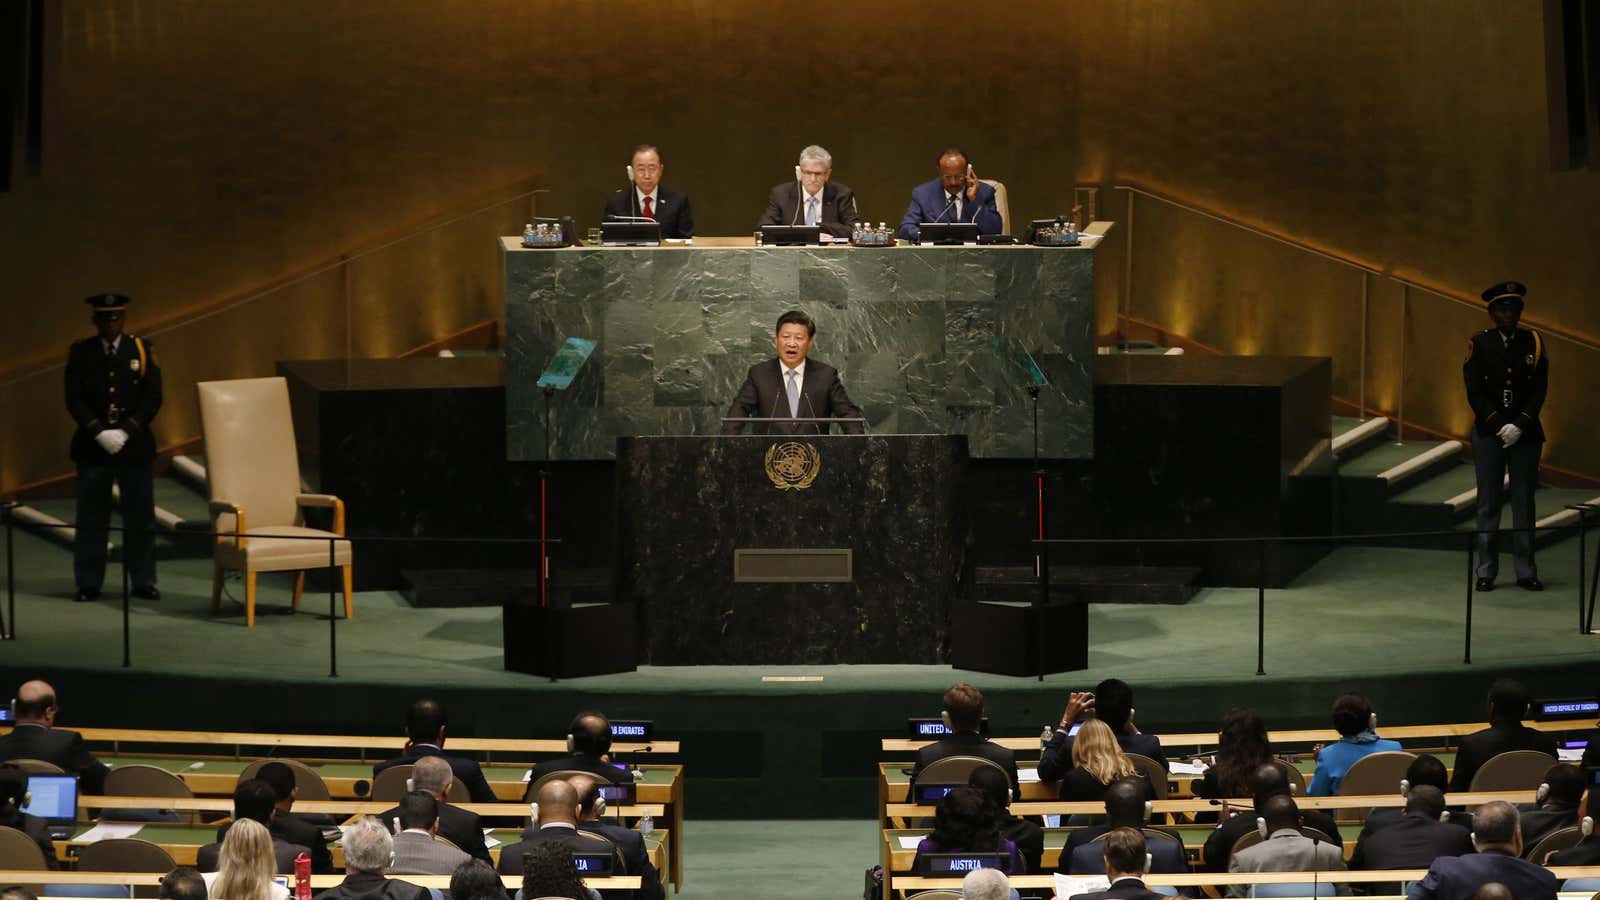 Xi Jinping addresses the UN General Assembly.